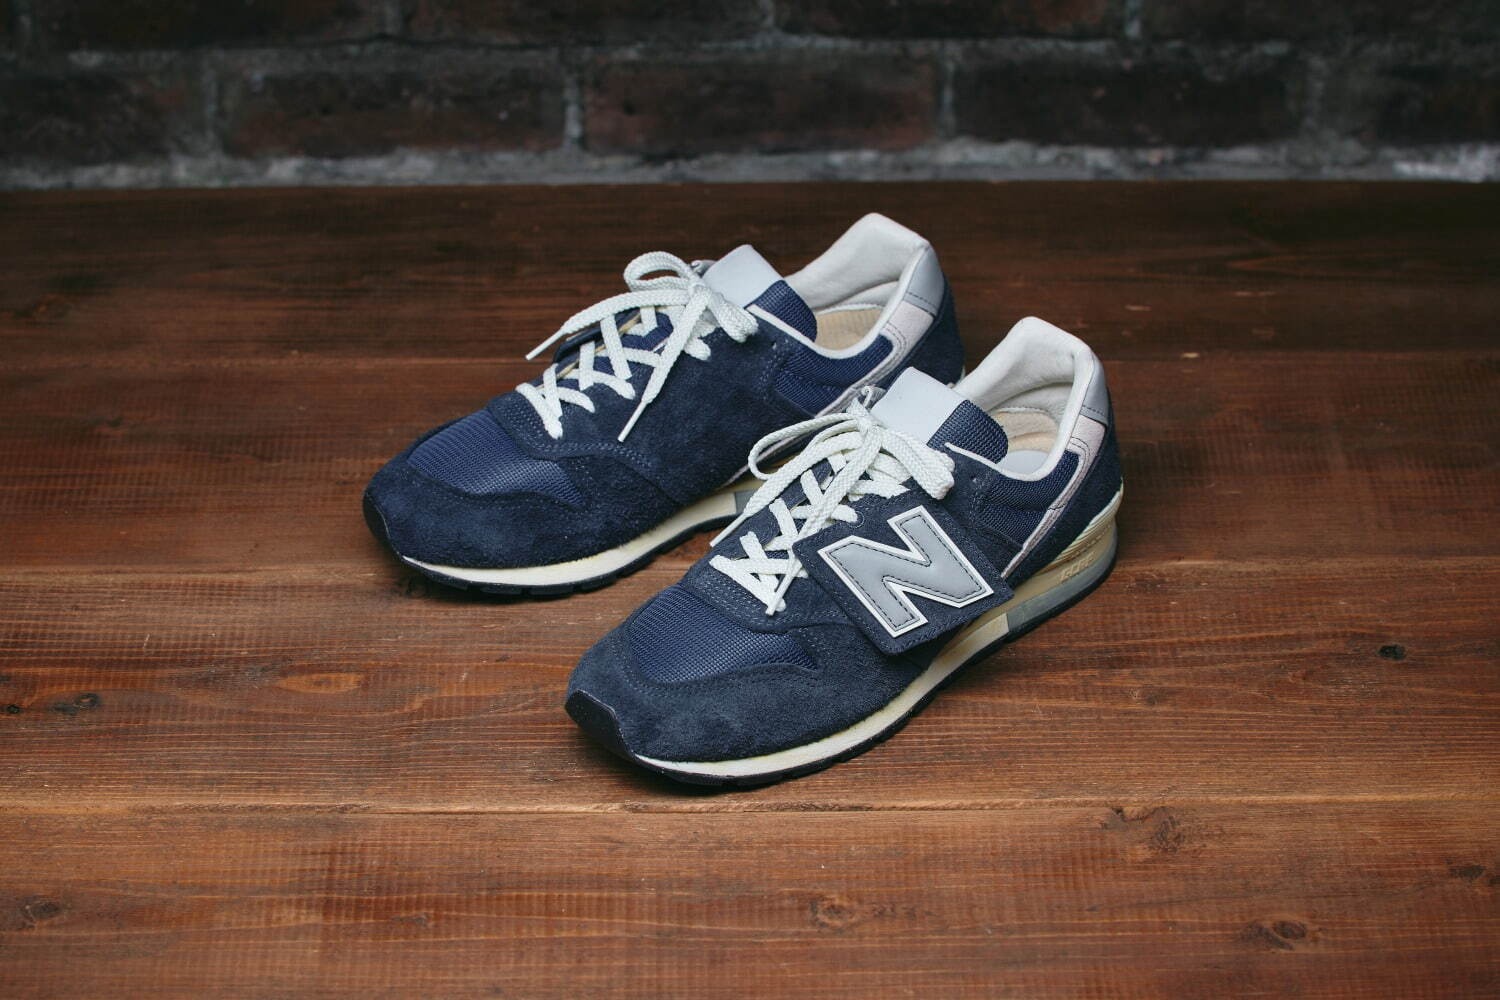 New Balance's 996 Turns 35 With Minimalist Suede Colorways